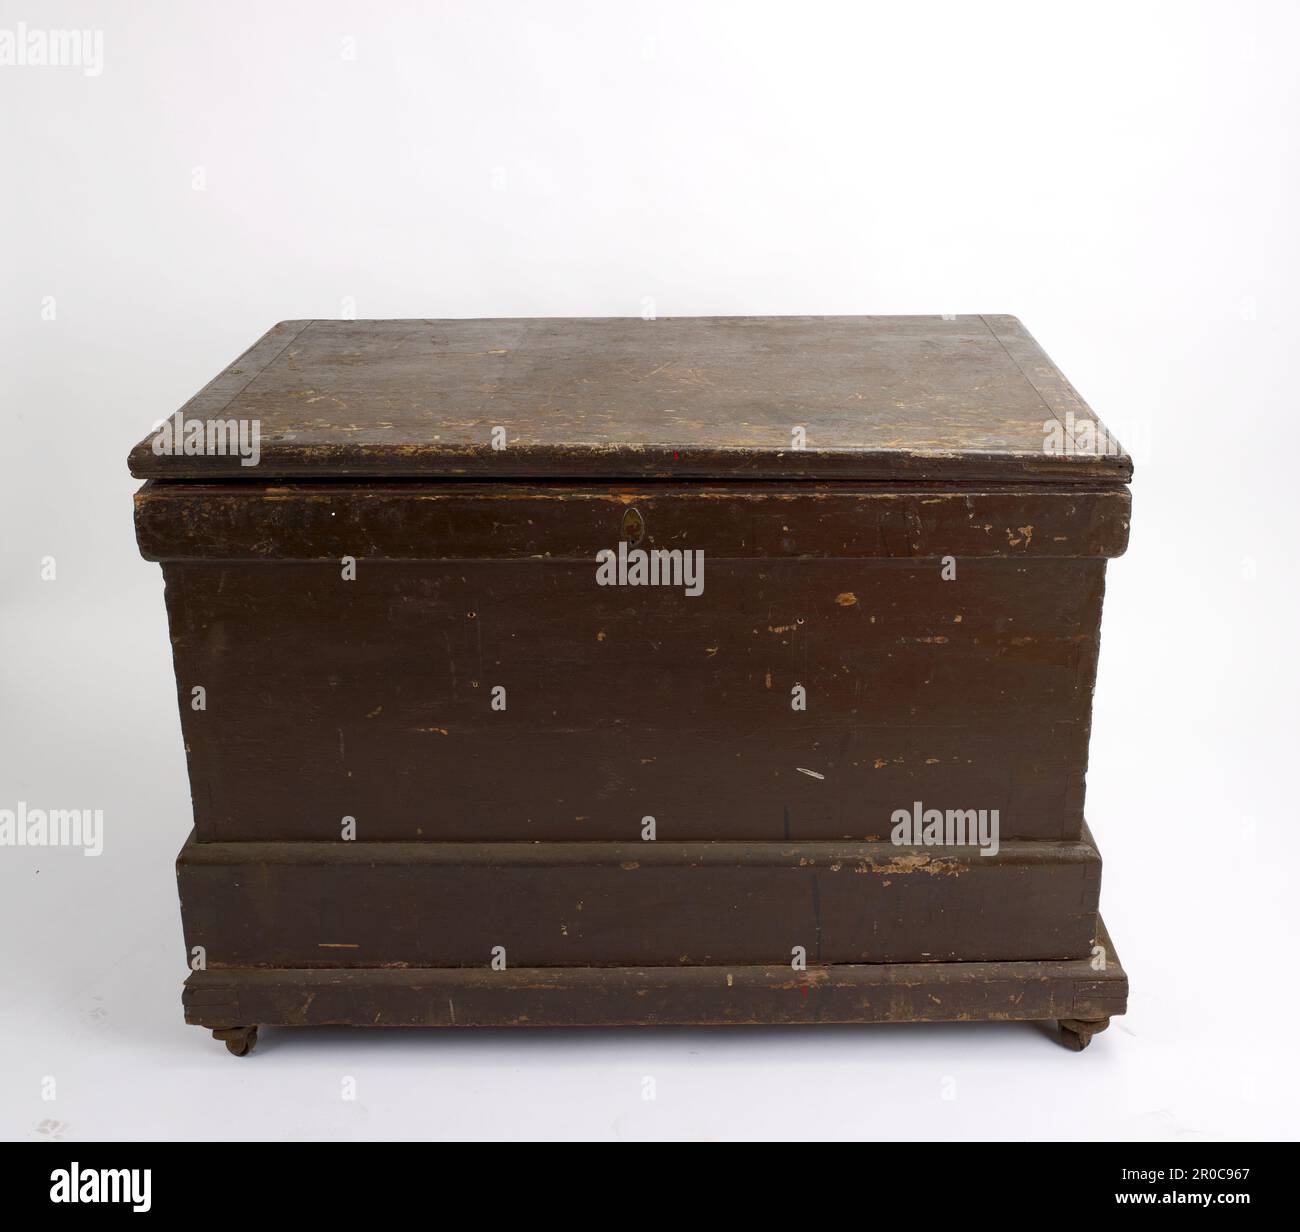 The 'Dolling' Tool Chest, 1780-1790. Pinto Collection. Large tool chest with hinged lid to top. pine carcass, the interior fitments of oak & pine, veneered with Spanish mahogany, inlaid with various woods. Stock Photo